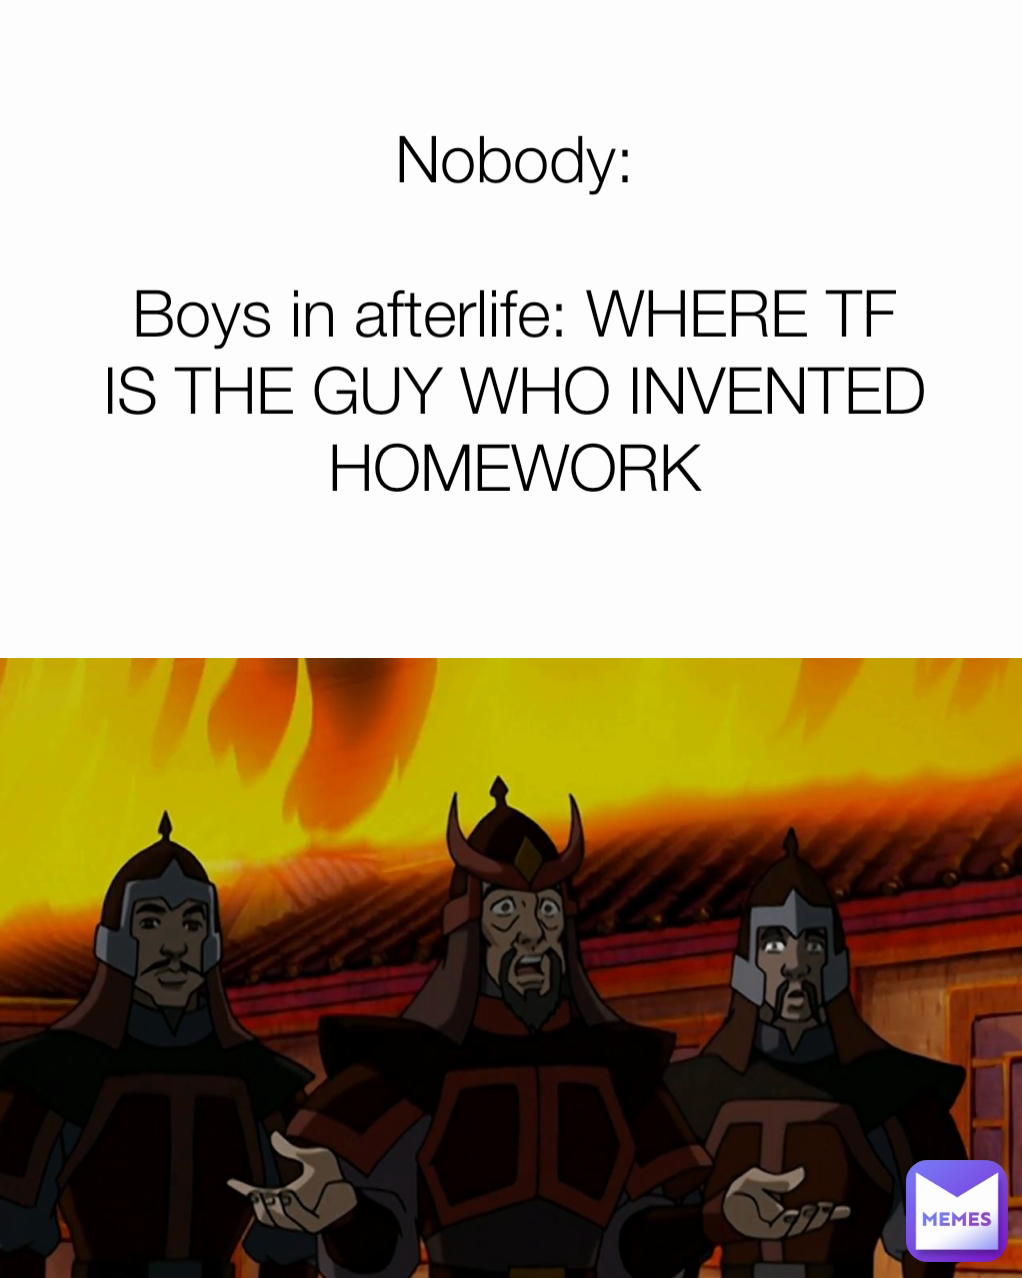 Nobody:

Boys in afterlife: WHERE TF IS THE GUY WHO INVENTED HOMEWORK